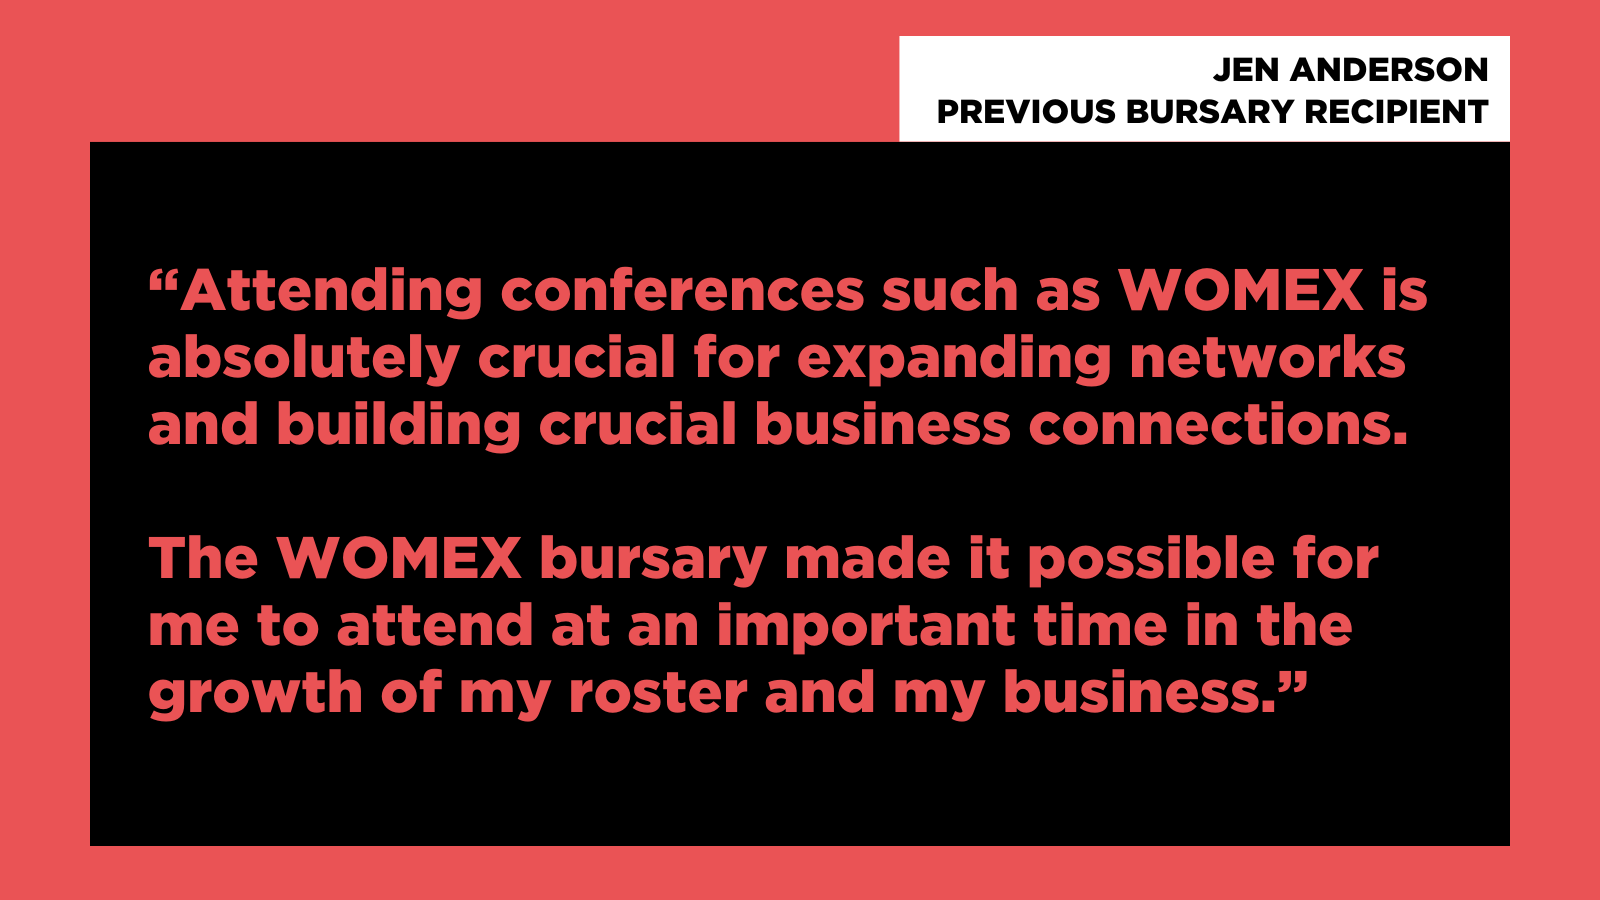 "Attending conferences such as WOMEX is absolutely crucial for expanding networks and building crucial business connections. The WOMEX bursary made it possible for me to attend at an important time in the growth of my roster and my business."